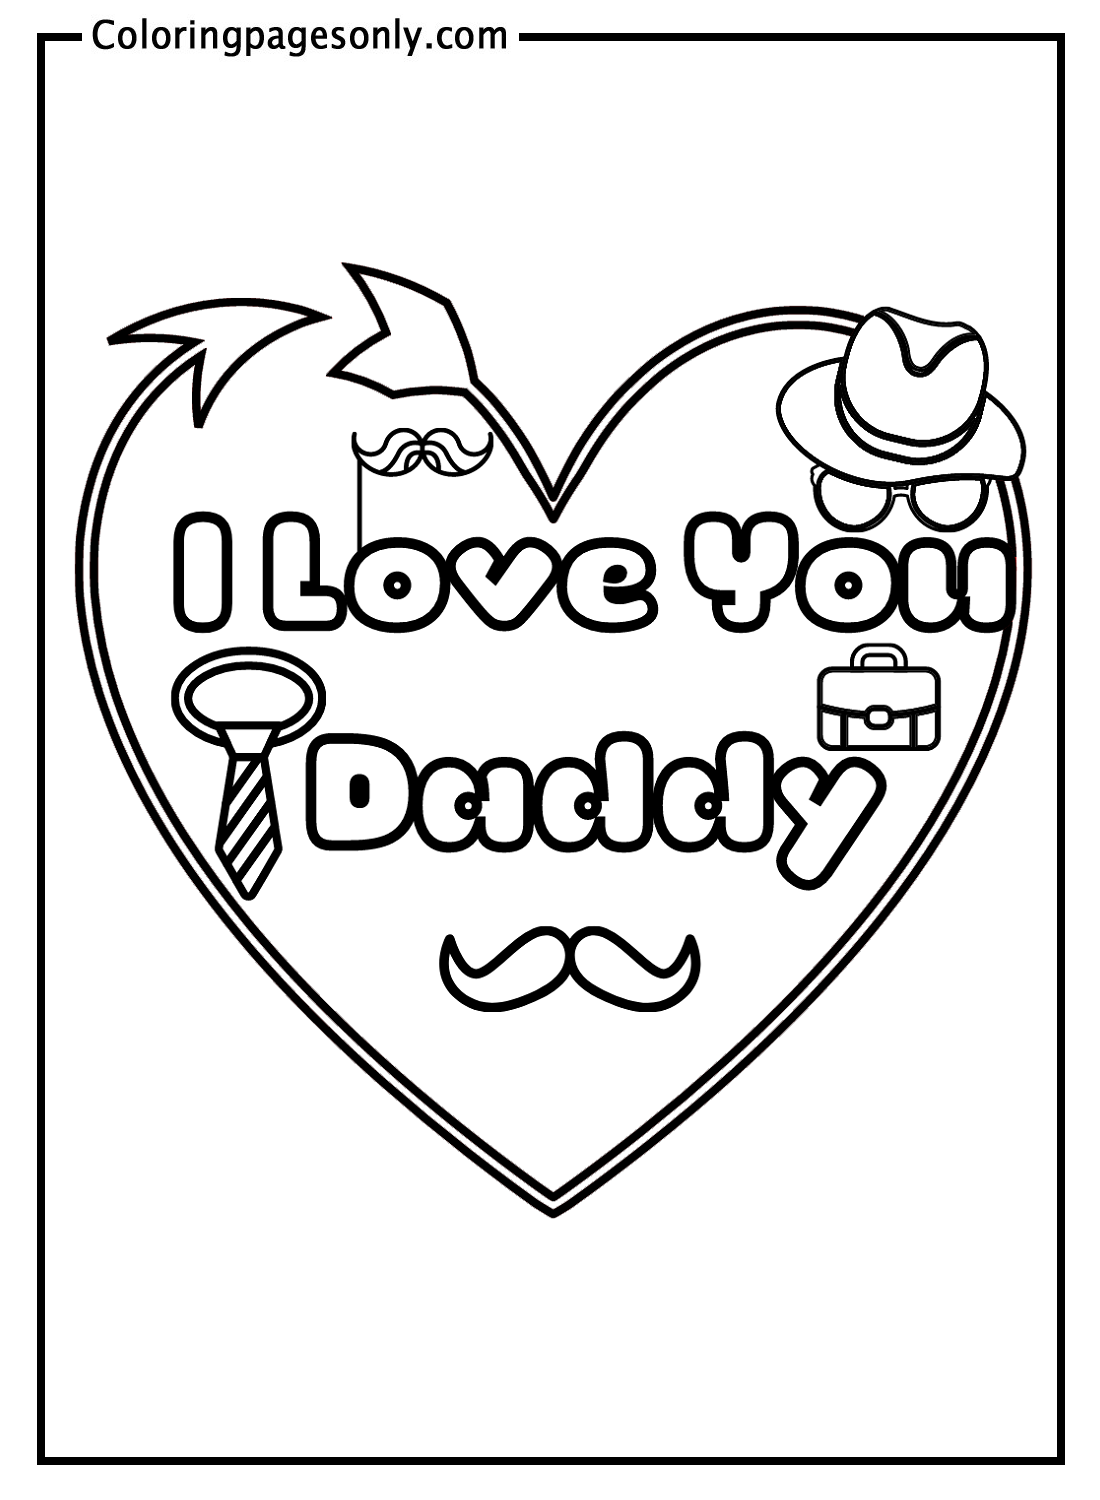 I Love You Daddy Coloring Pages